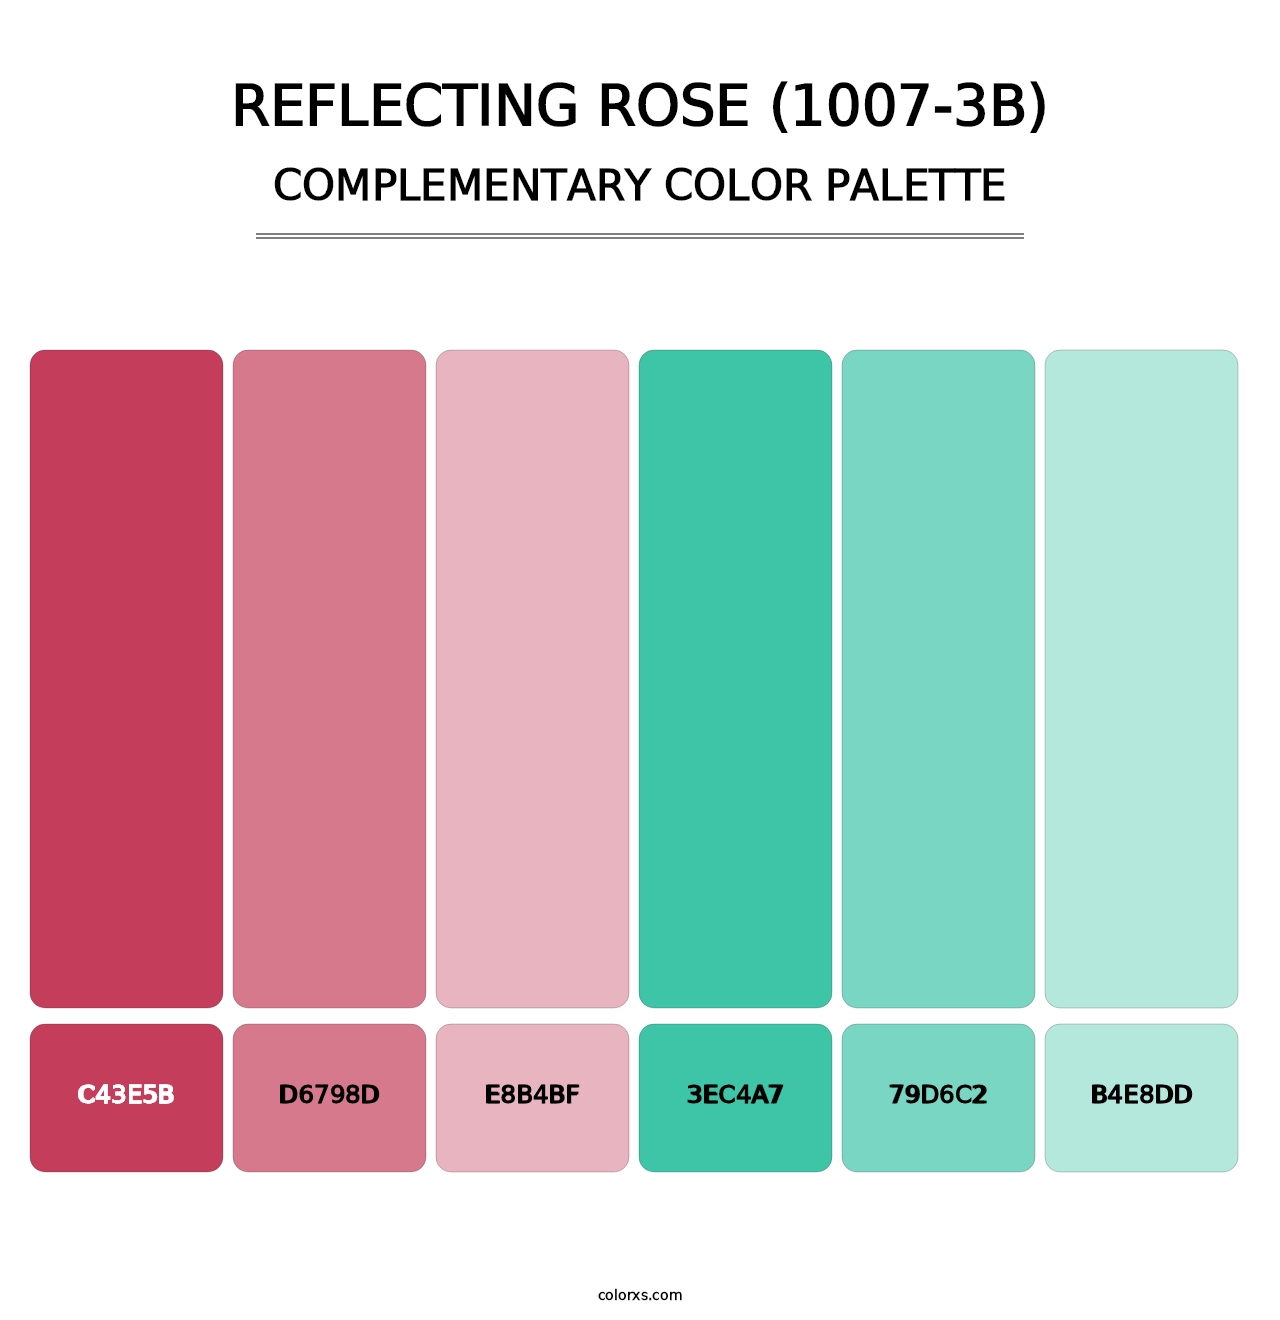 Reflecting Rose (1007-3B) - Complementary Color Palette